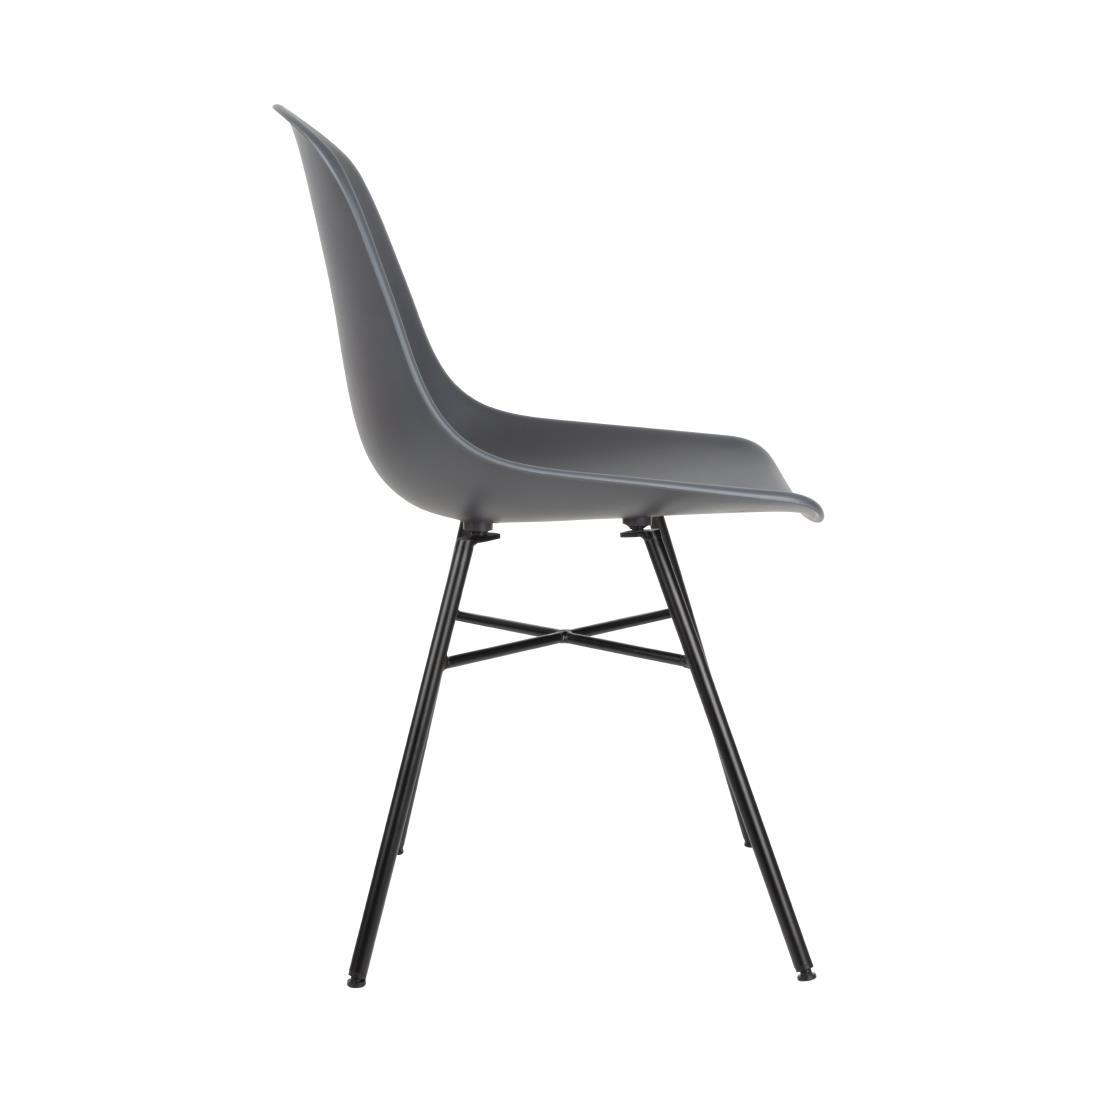 Bolero Arlo Side Chairs with Metal Frame Charcoal (Pack of 2) - DY347  - 2